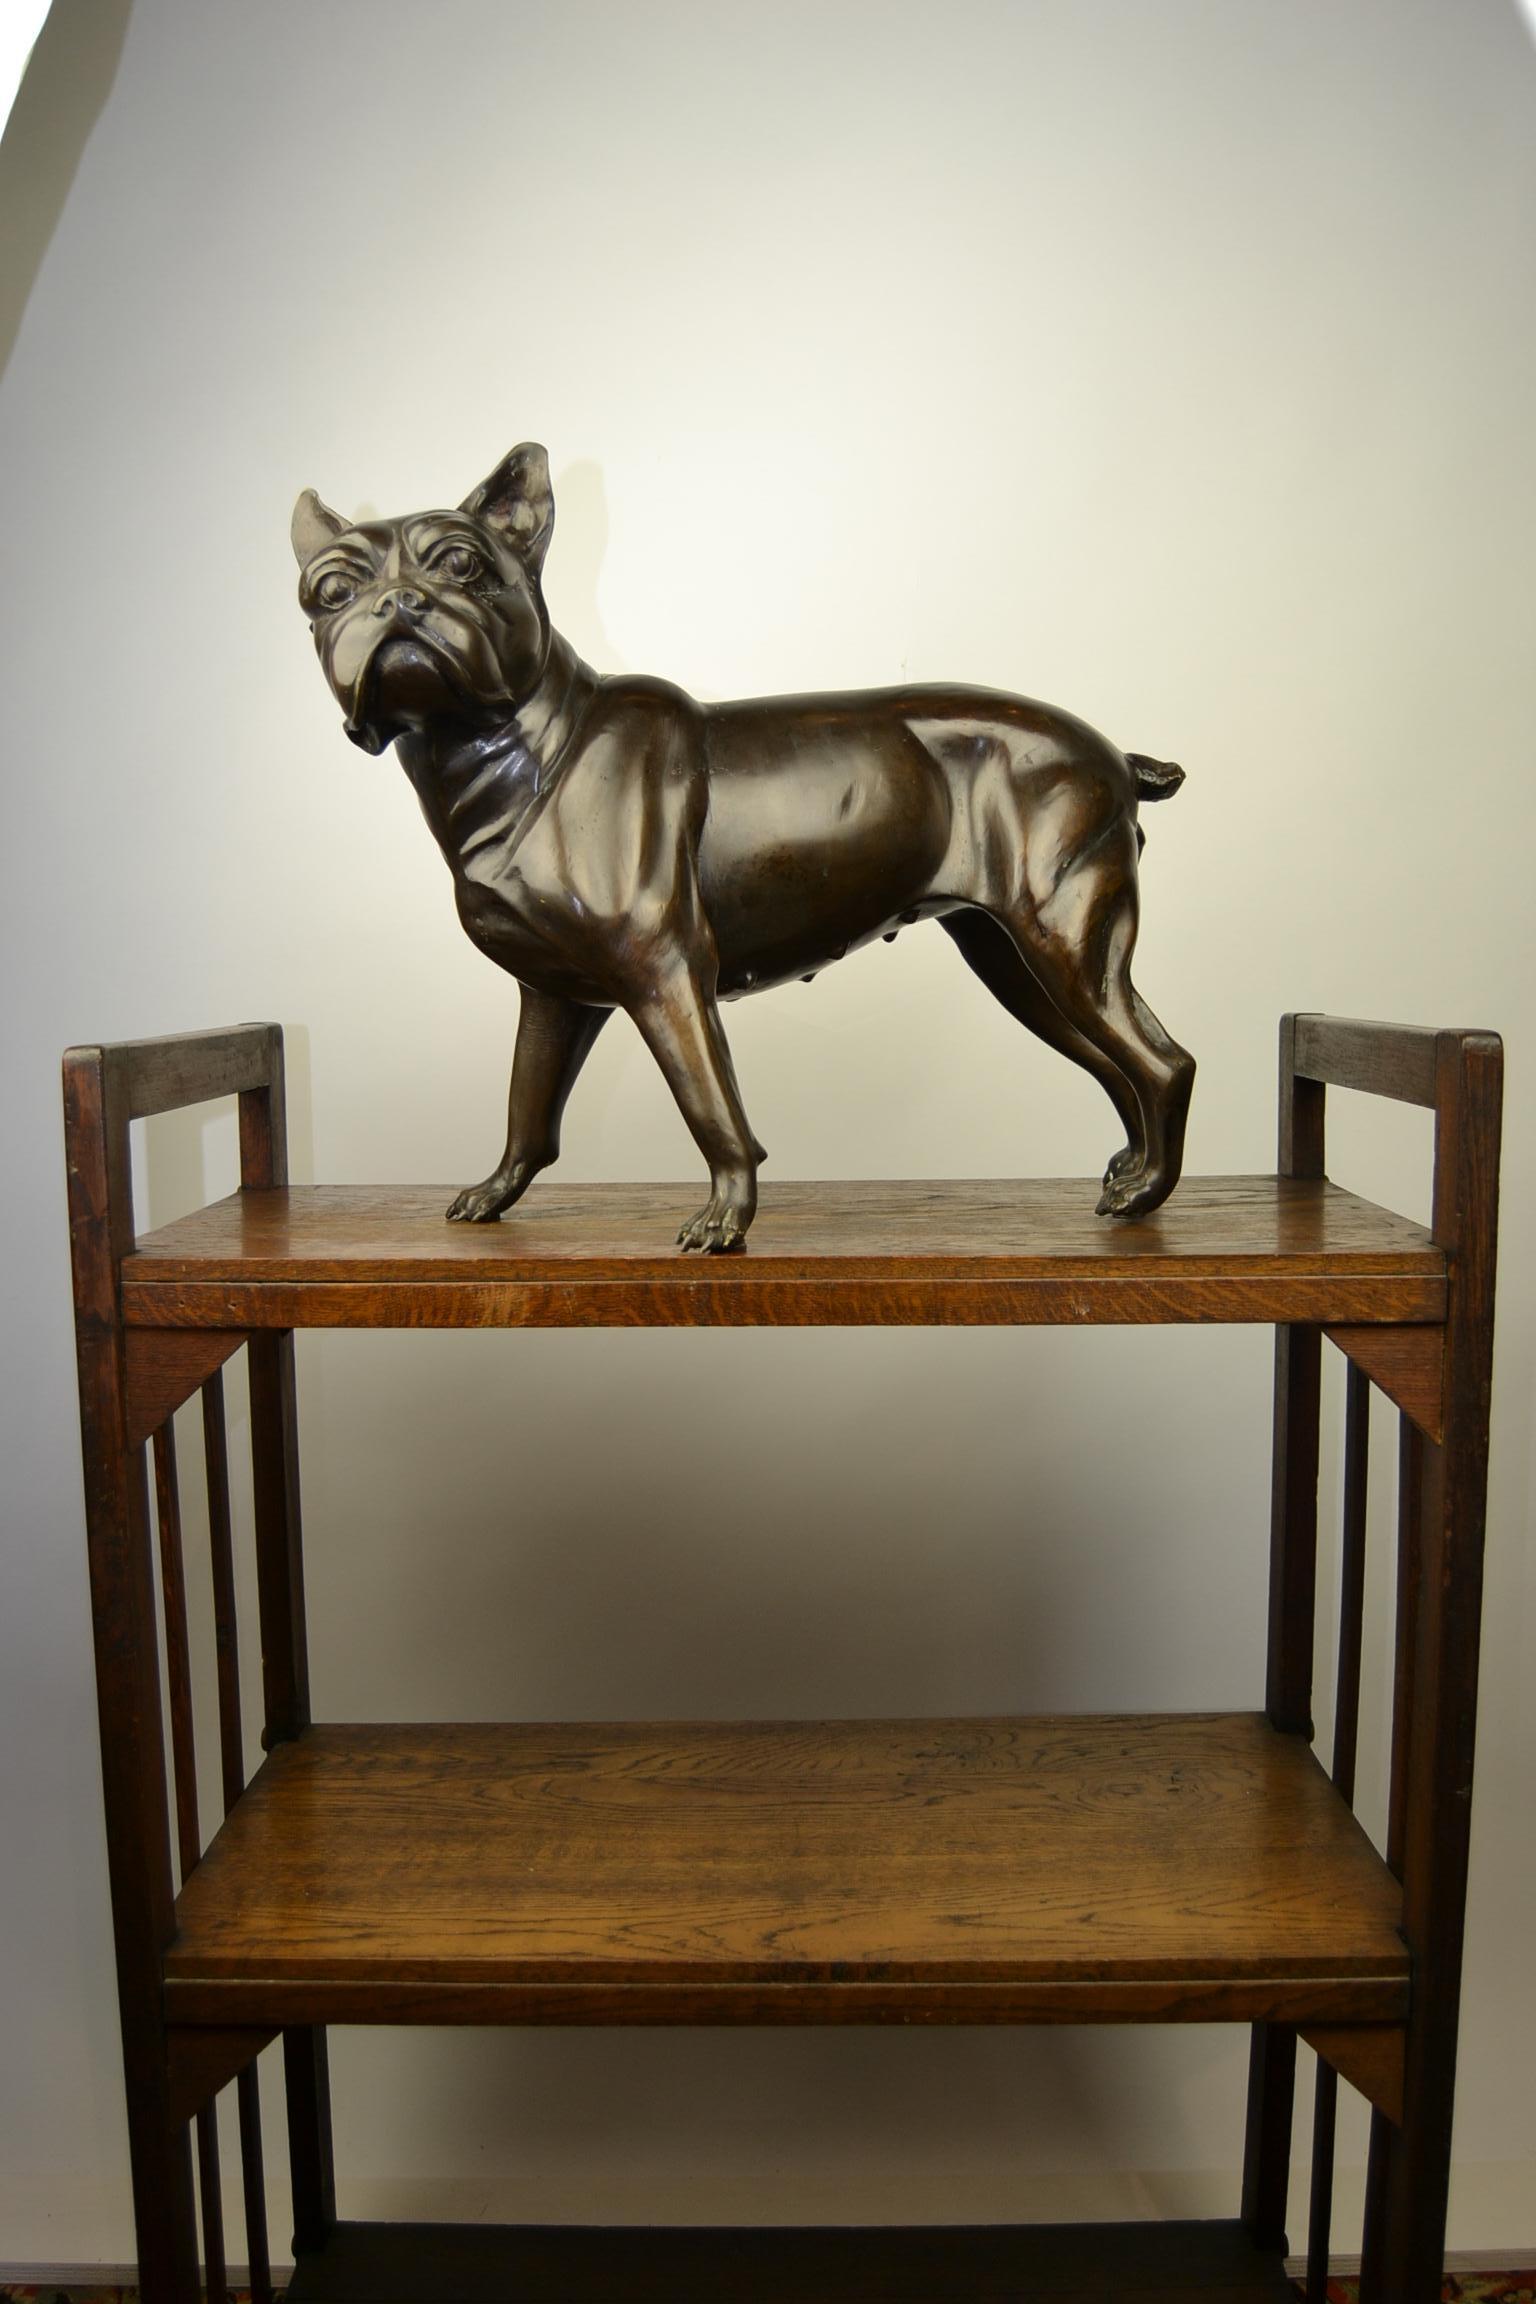 Life-size vintage bronze animal statue, dog statue .
Detailed French bulldog - Boston Terrier figurine.
Great home accent - interior decoration object.